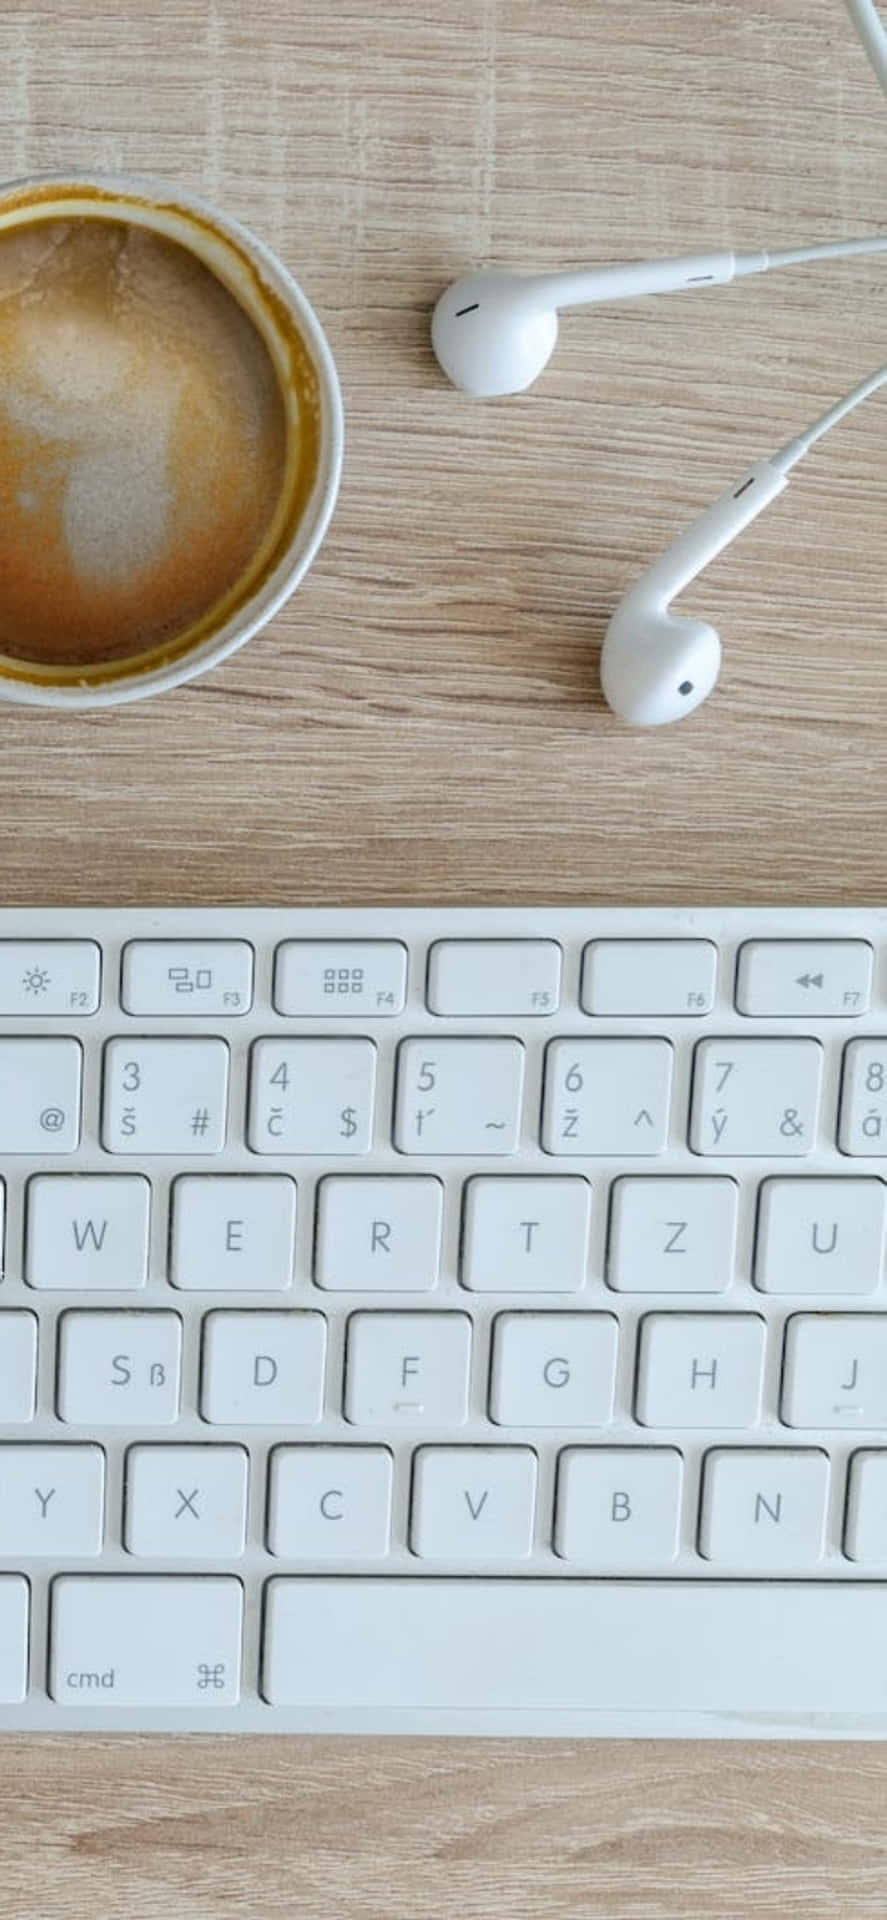 Iphone X Desk Background Earphones And A Keyboard